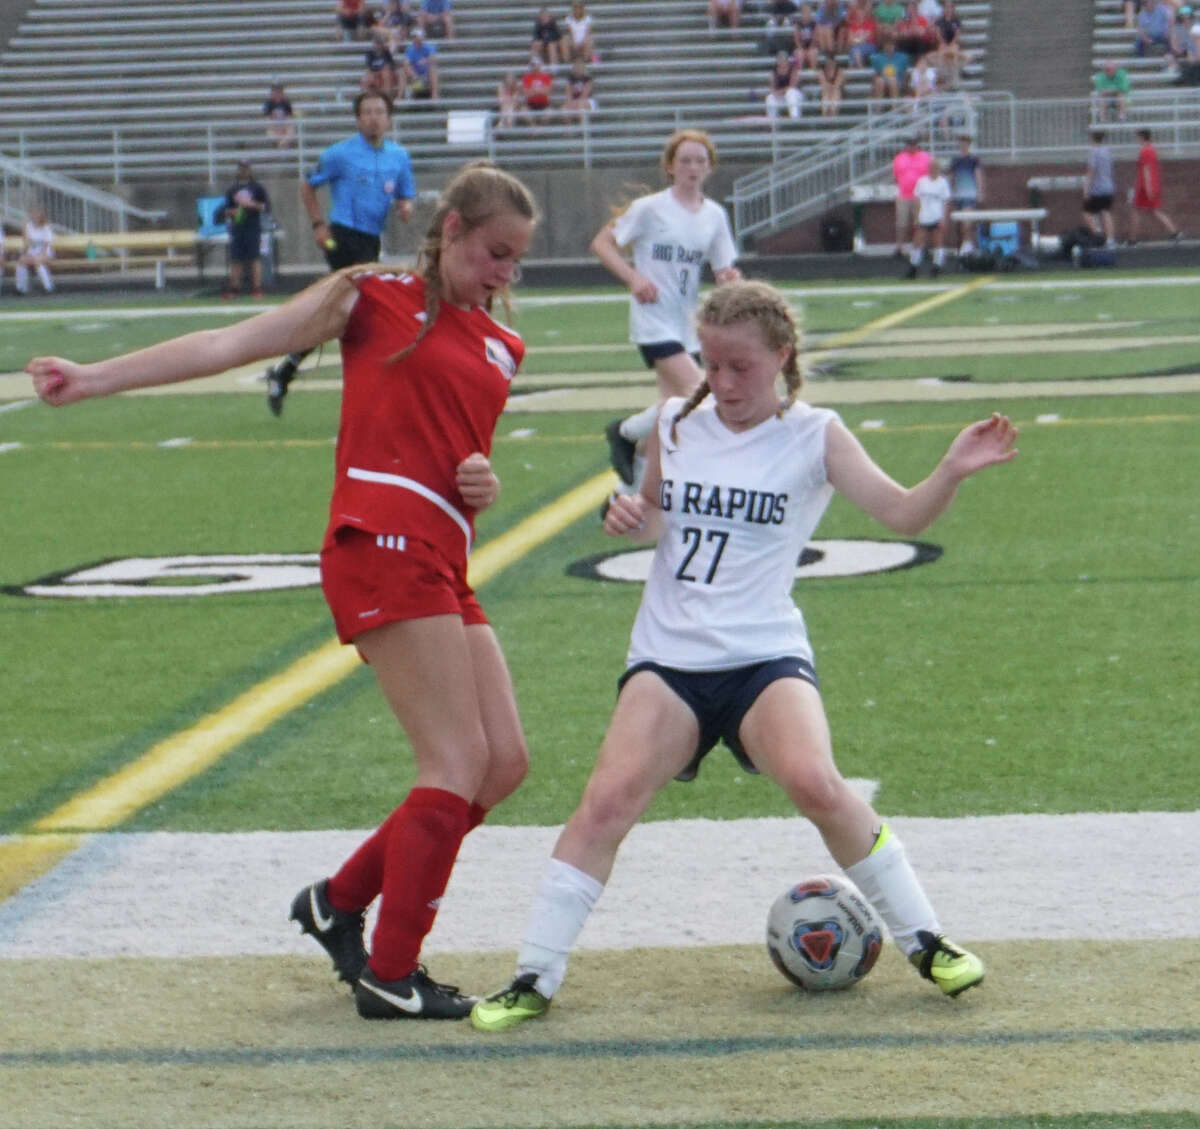 On Tuesday night in Comstock Park, the Big Rapids girls soccer team defeated Tawas 3-0 to advance to the Regional final.